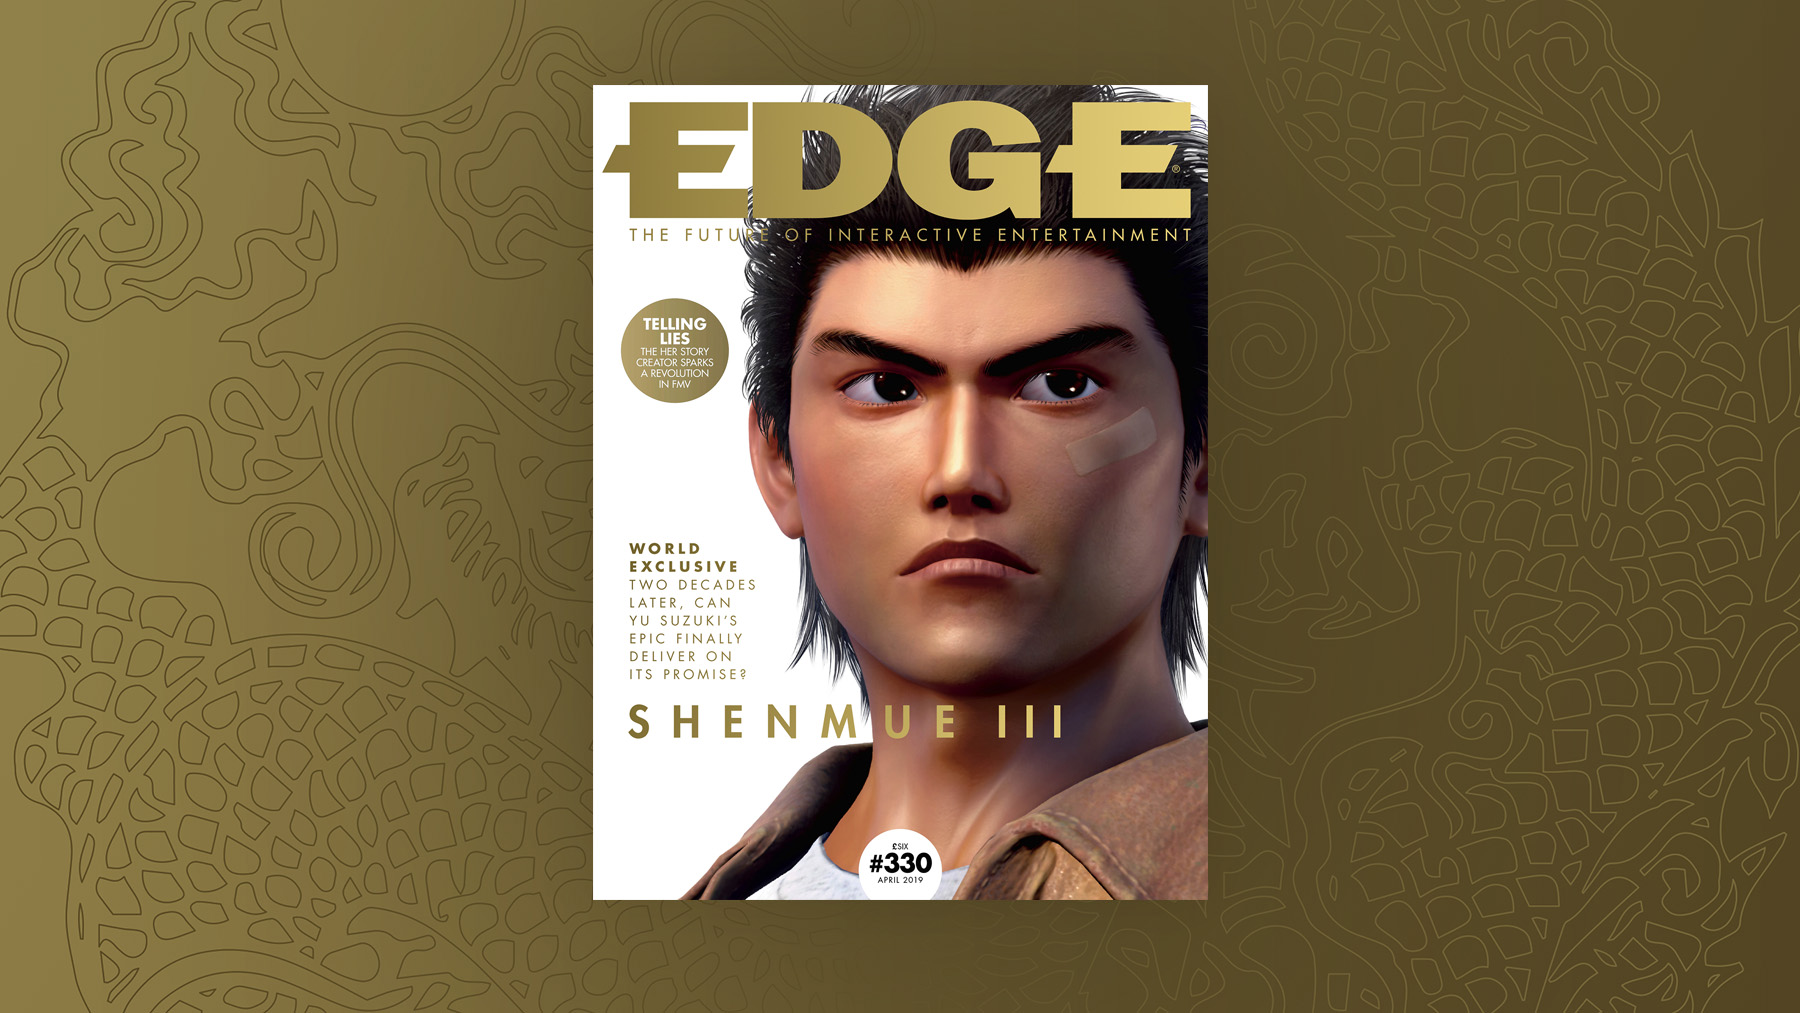 An image of Ryo from Shenmue 3 in Edge magazine